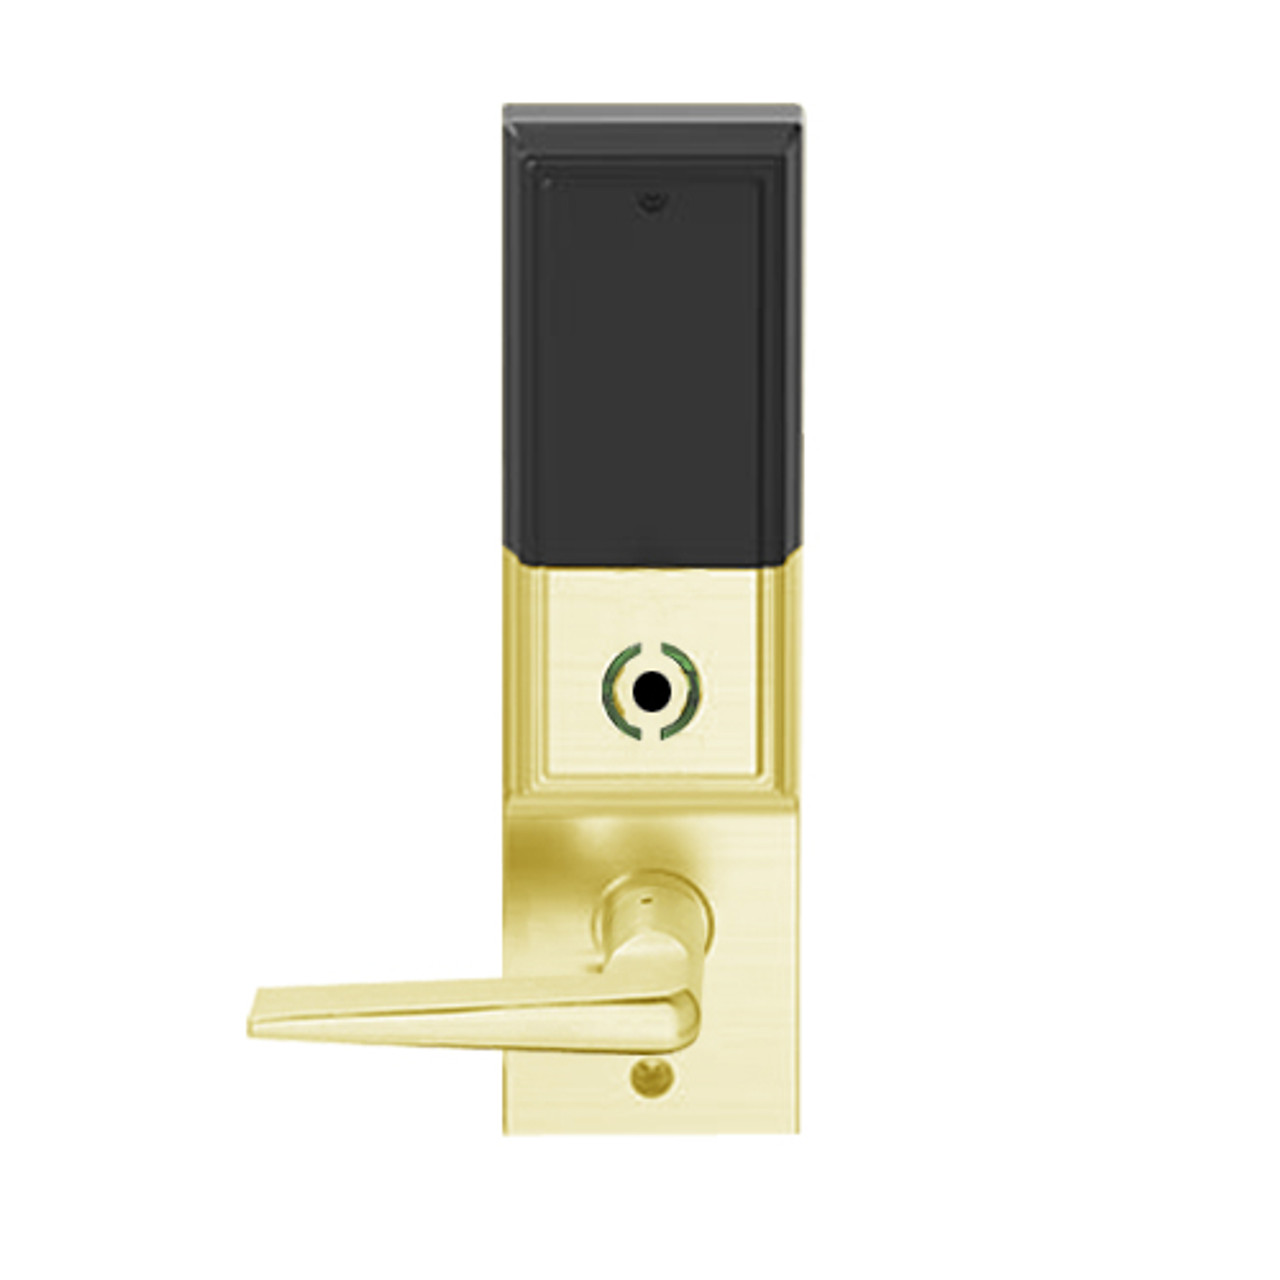 LEMB-ADD-J-05-605 Schlage Privacy/Office Wireless Addison Mortise Lock with Push Button, LED and 05 Lever Prepped for FSIC in Bright Brass